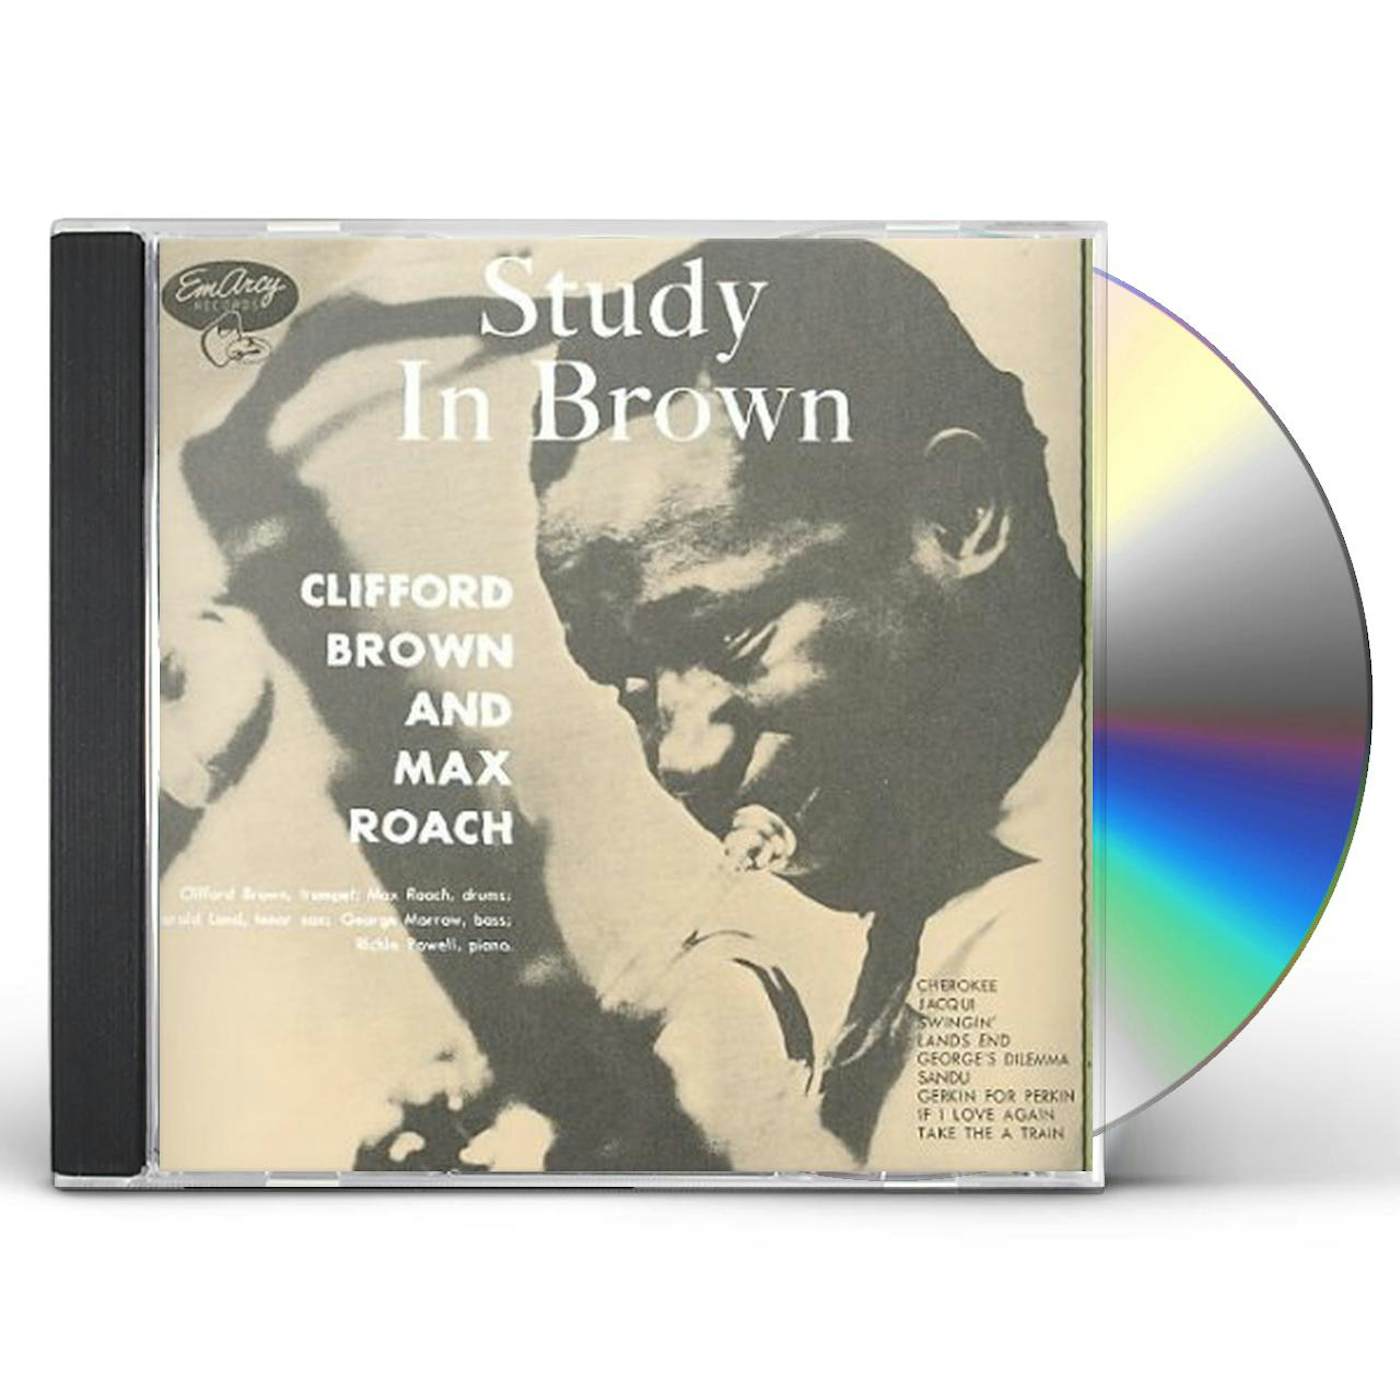 Clifford Brown & Max Roach Study In Brown CD